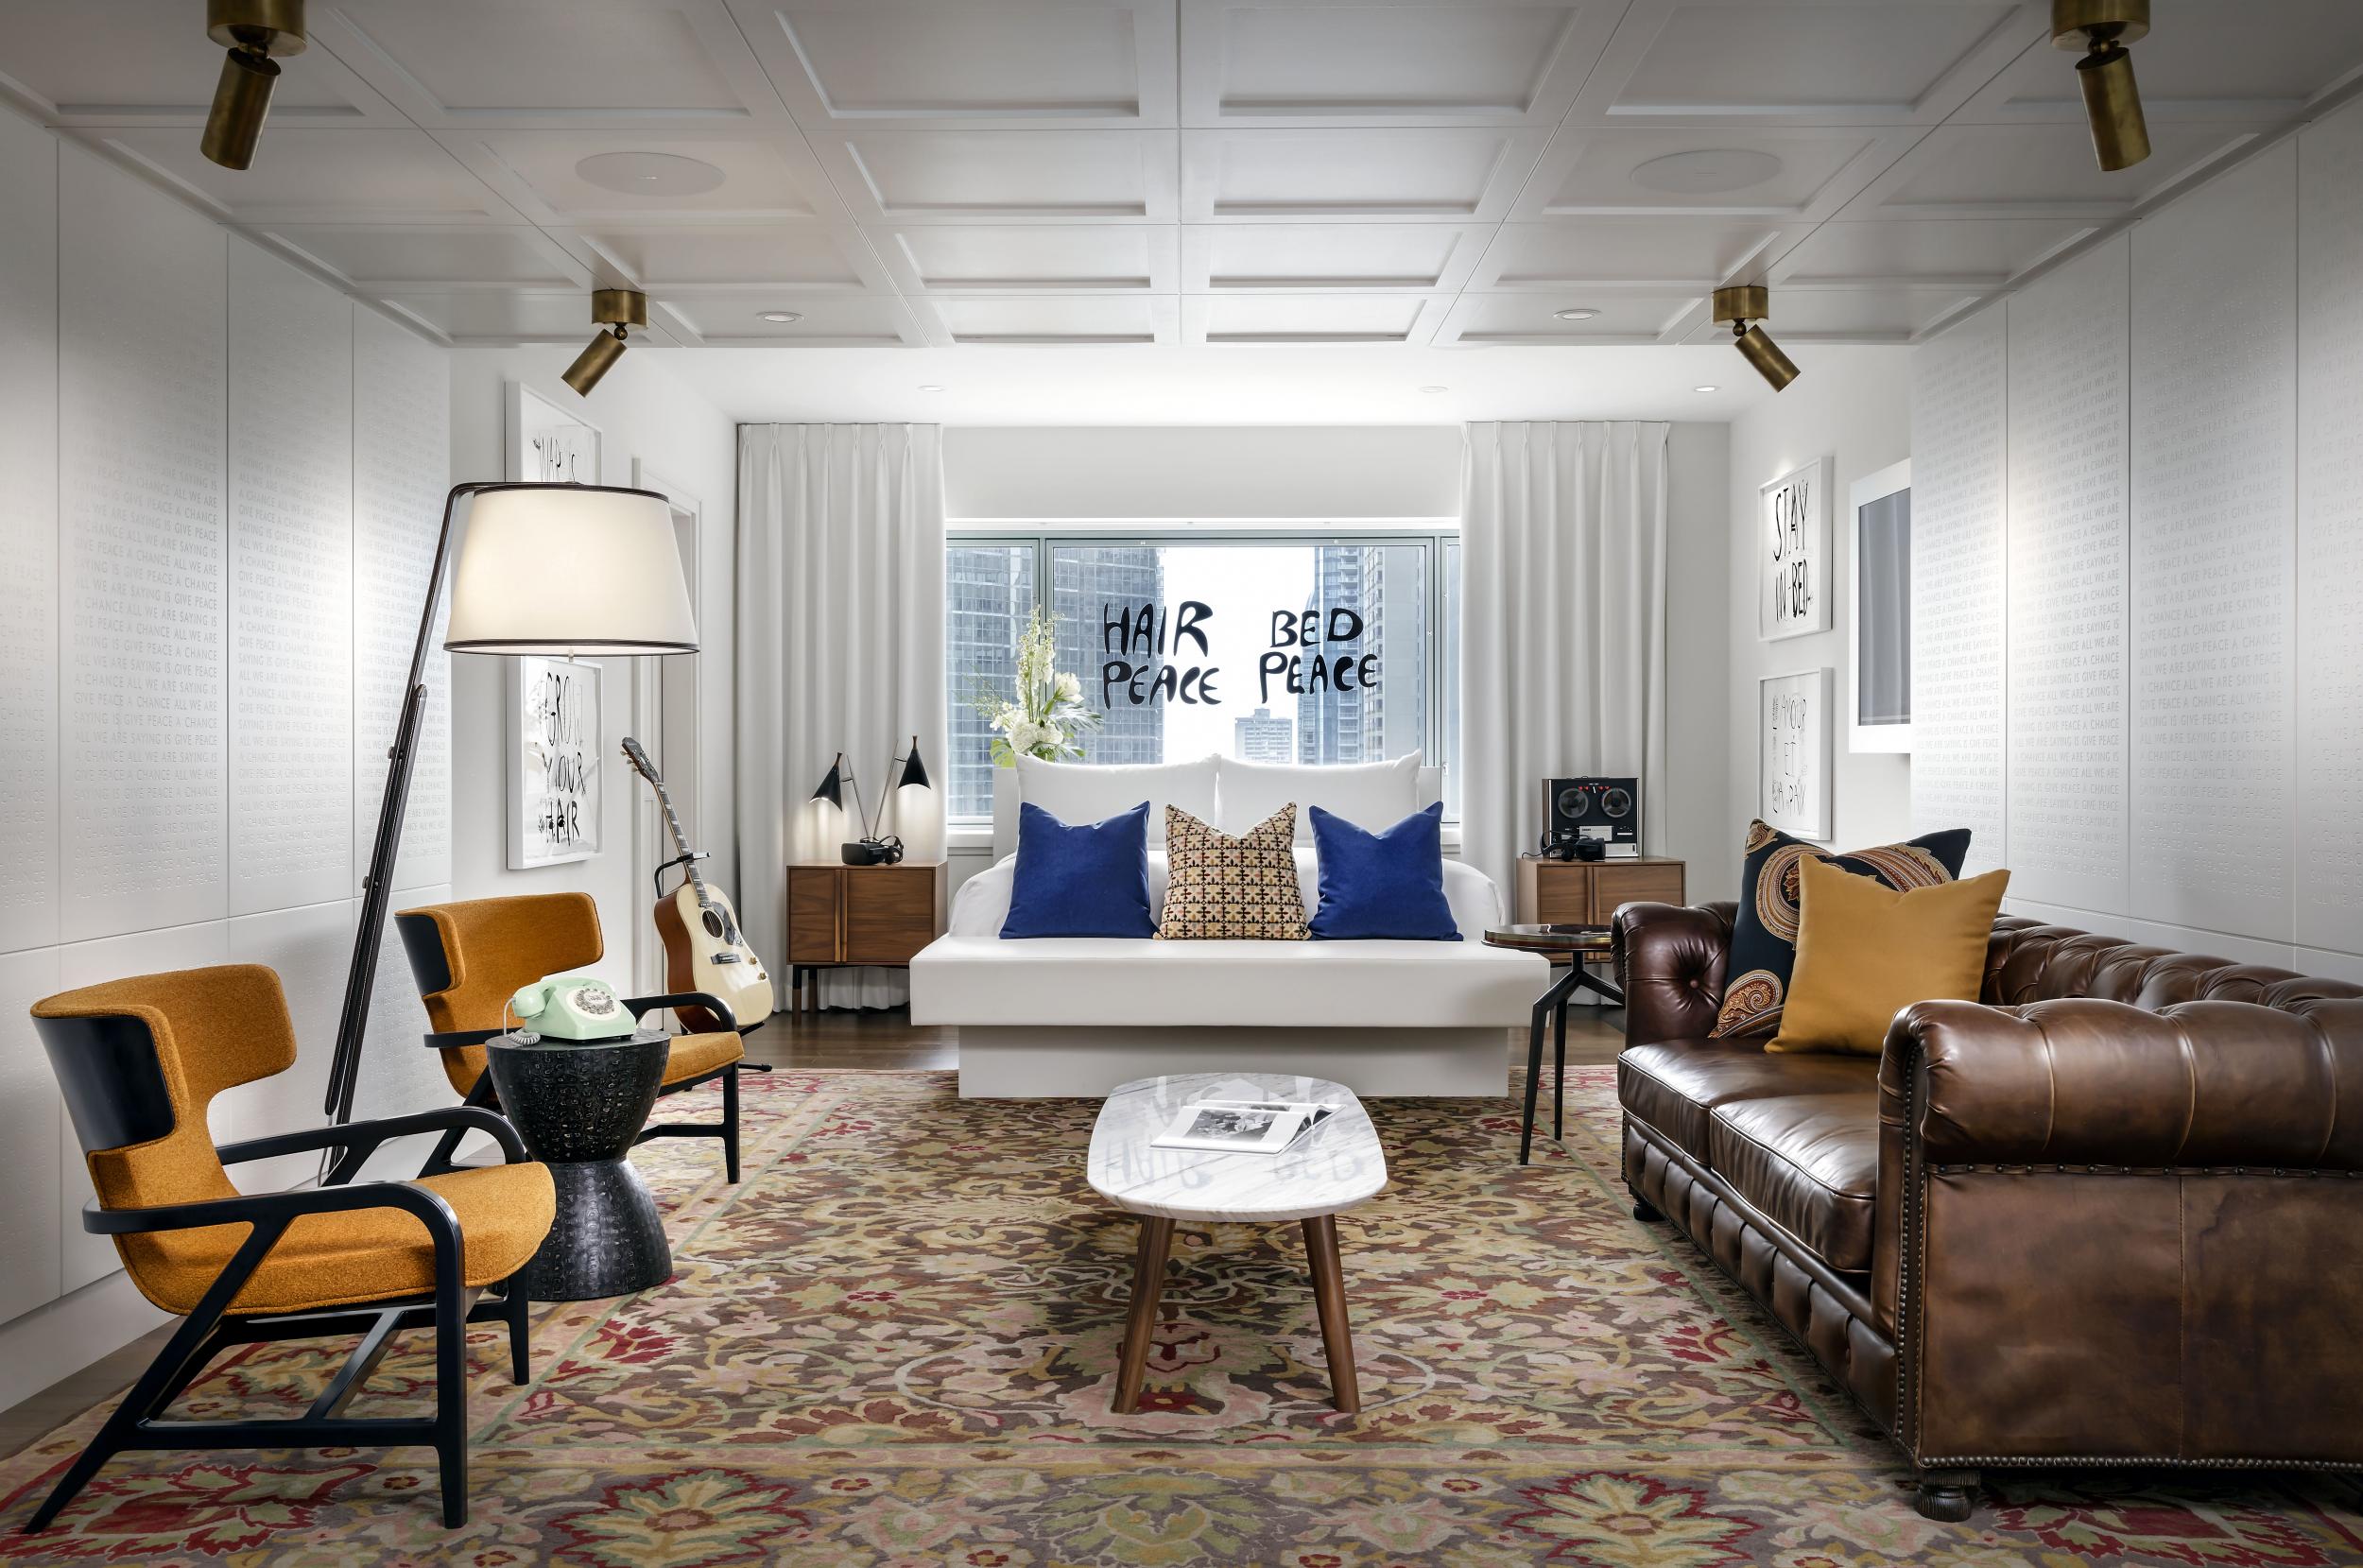 Inside suite 1742 where John Lennon and Yoko Ono stayed 50 years ago